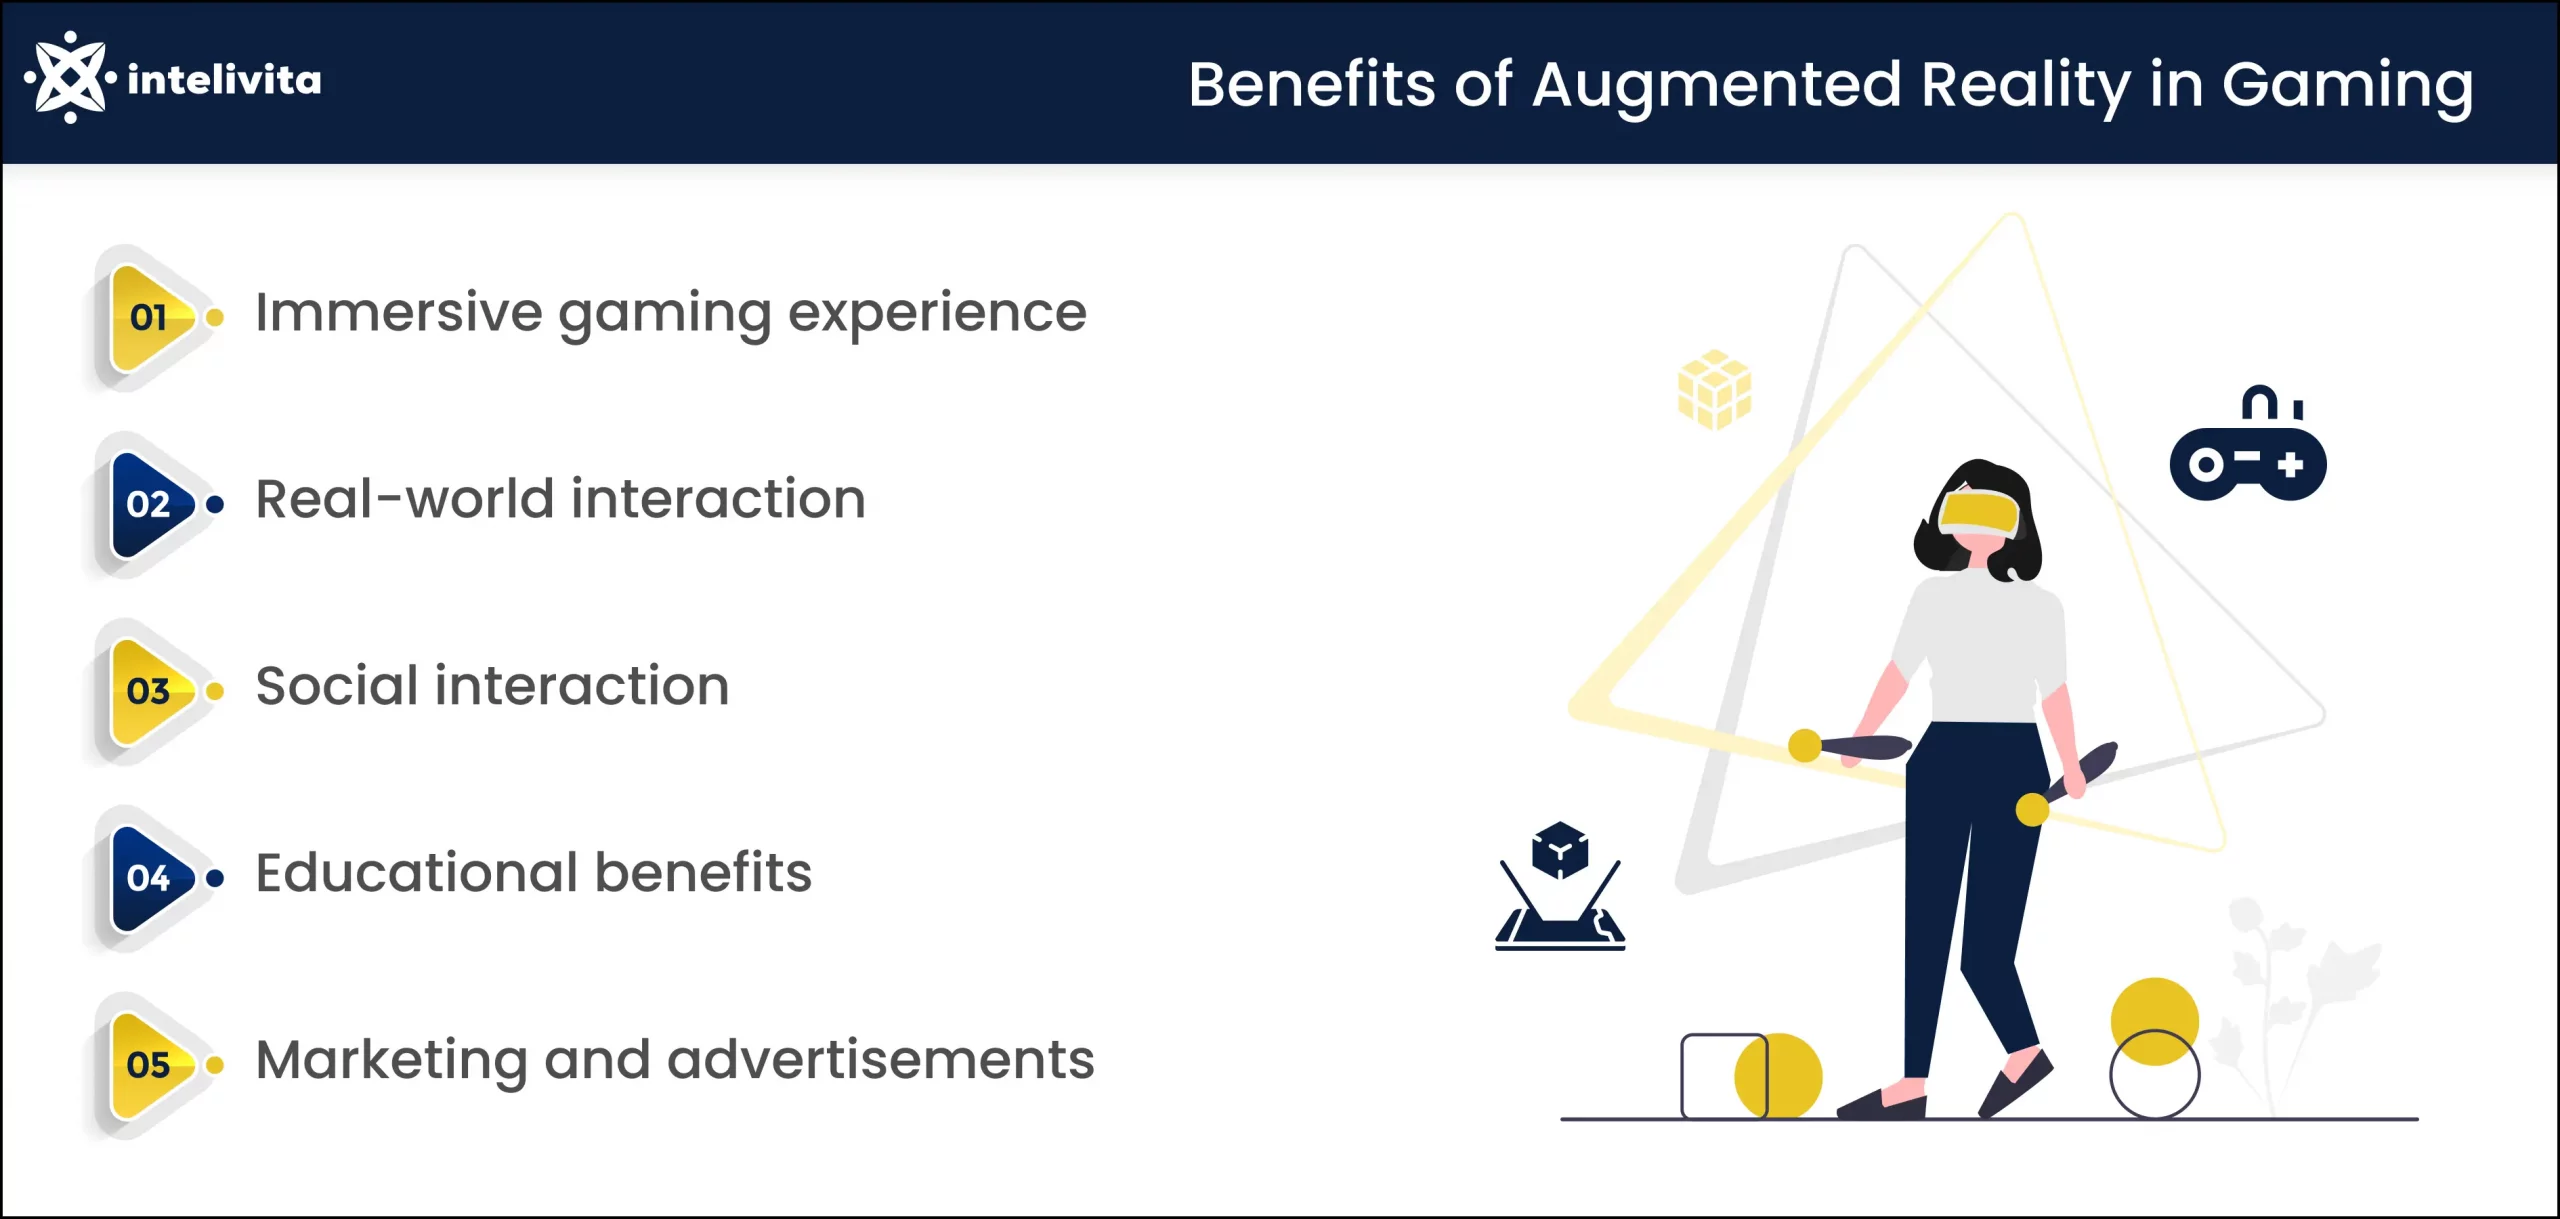 Image showing Benefits of Augmented Reality in Gaming